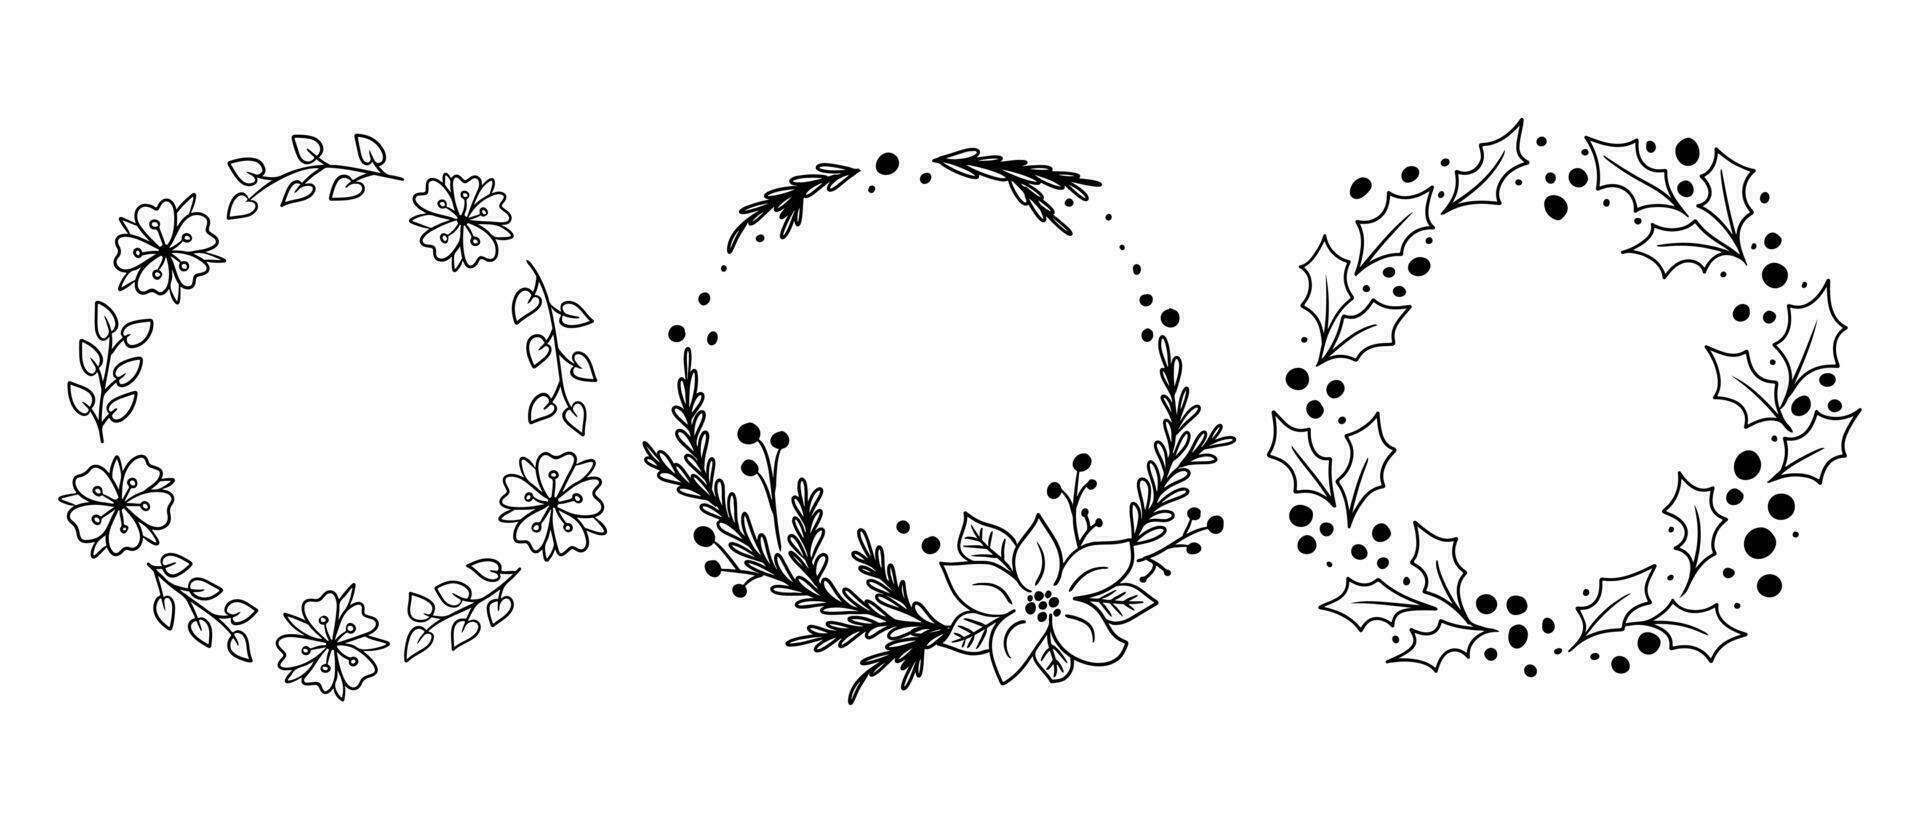 Collection of contour doodle floral wreaths or frames. Vector sketchy templates. Black outlines elements with flowers and leaves for for wedding, anniversary card, invitation on white background